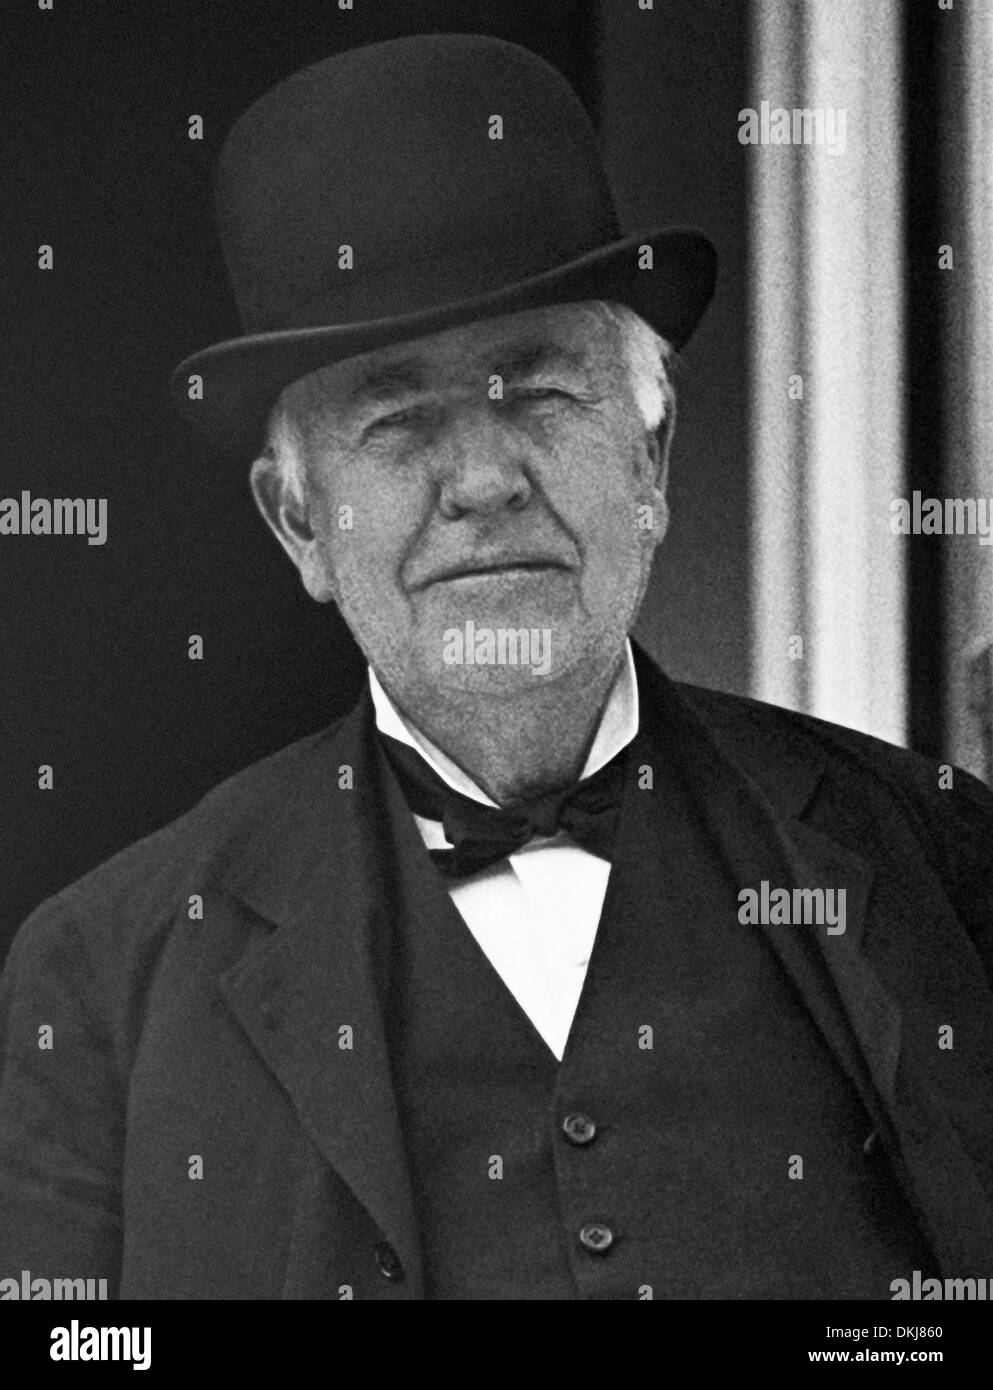 Vintage photo of American inventor and businessman Thomas Alva Edison (1847 – 1931). Picture taken in 1922 by the National Photo Company. Stock Photo